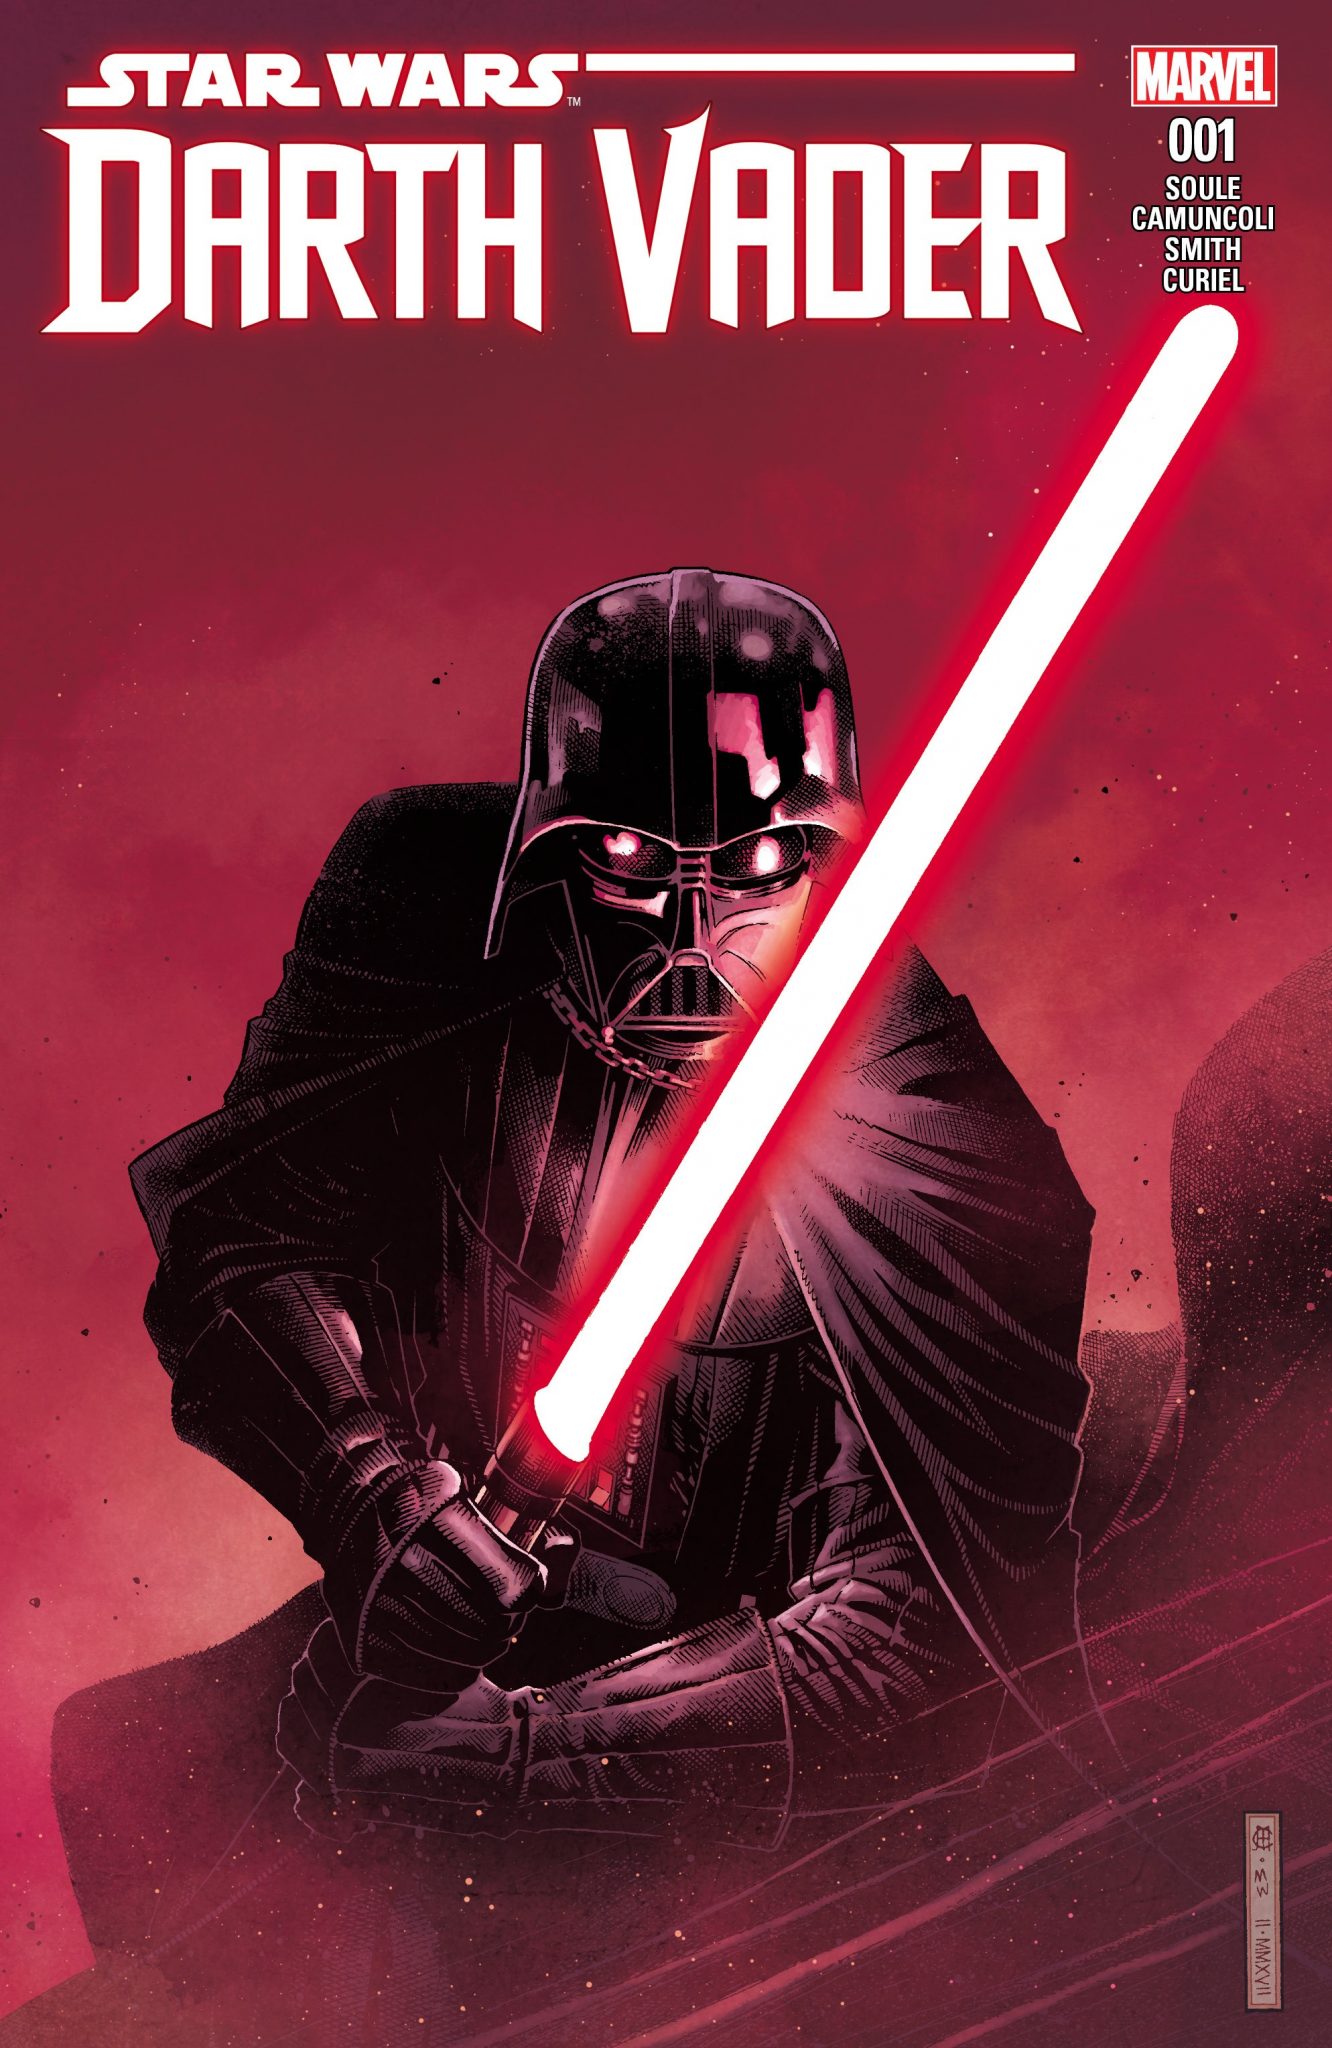 Marvel Preview: Star Wars: Revelations #1 • AIPT